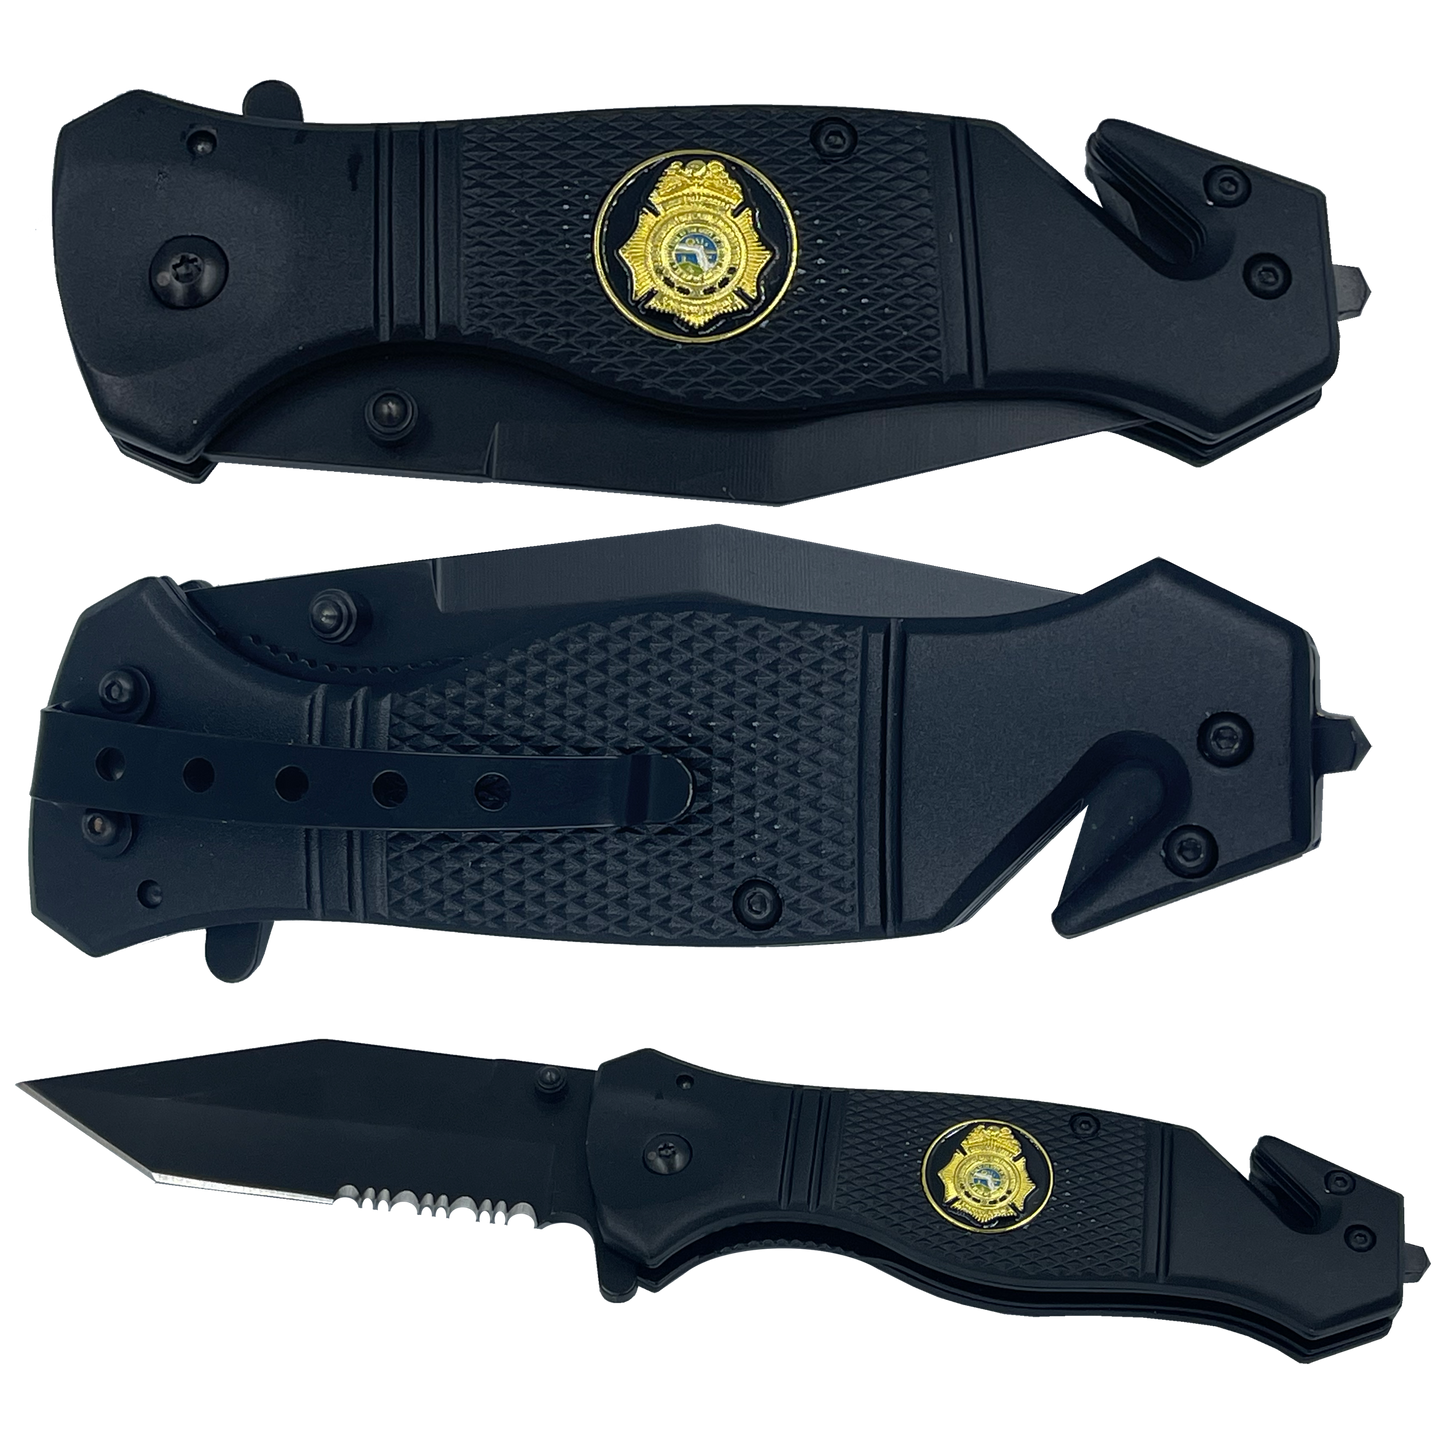 FDLE collectible 3-in-1 Police Tactical Rescue knife tool with Seatbelt Cutter, Steel Serrated Blade, Glass Breaker Special Agent